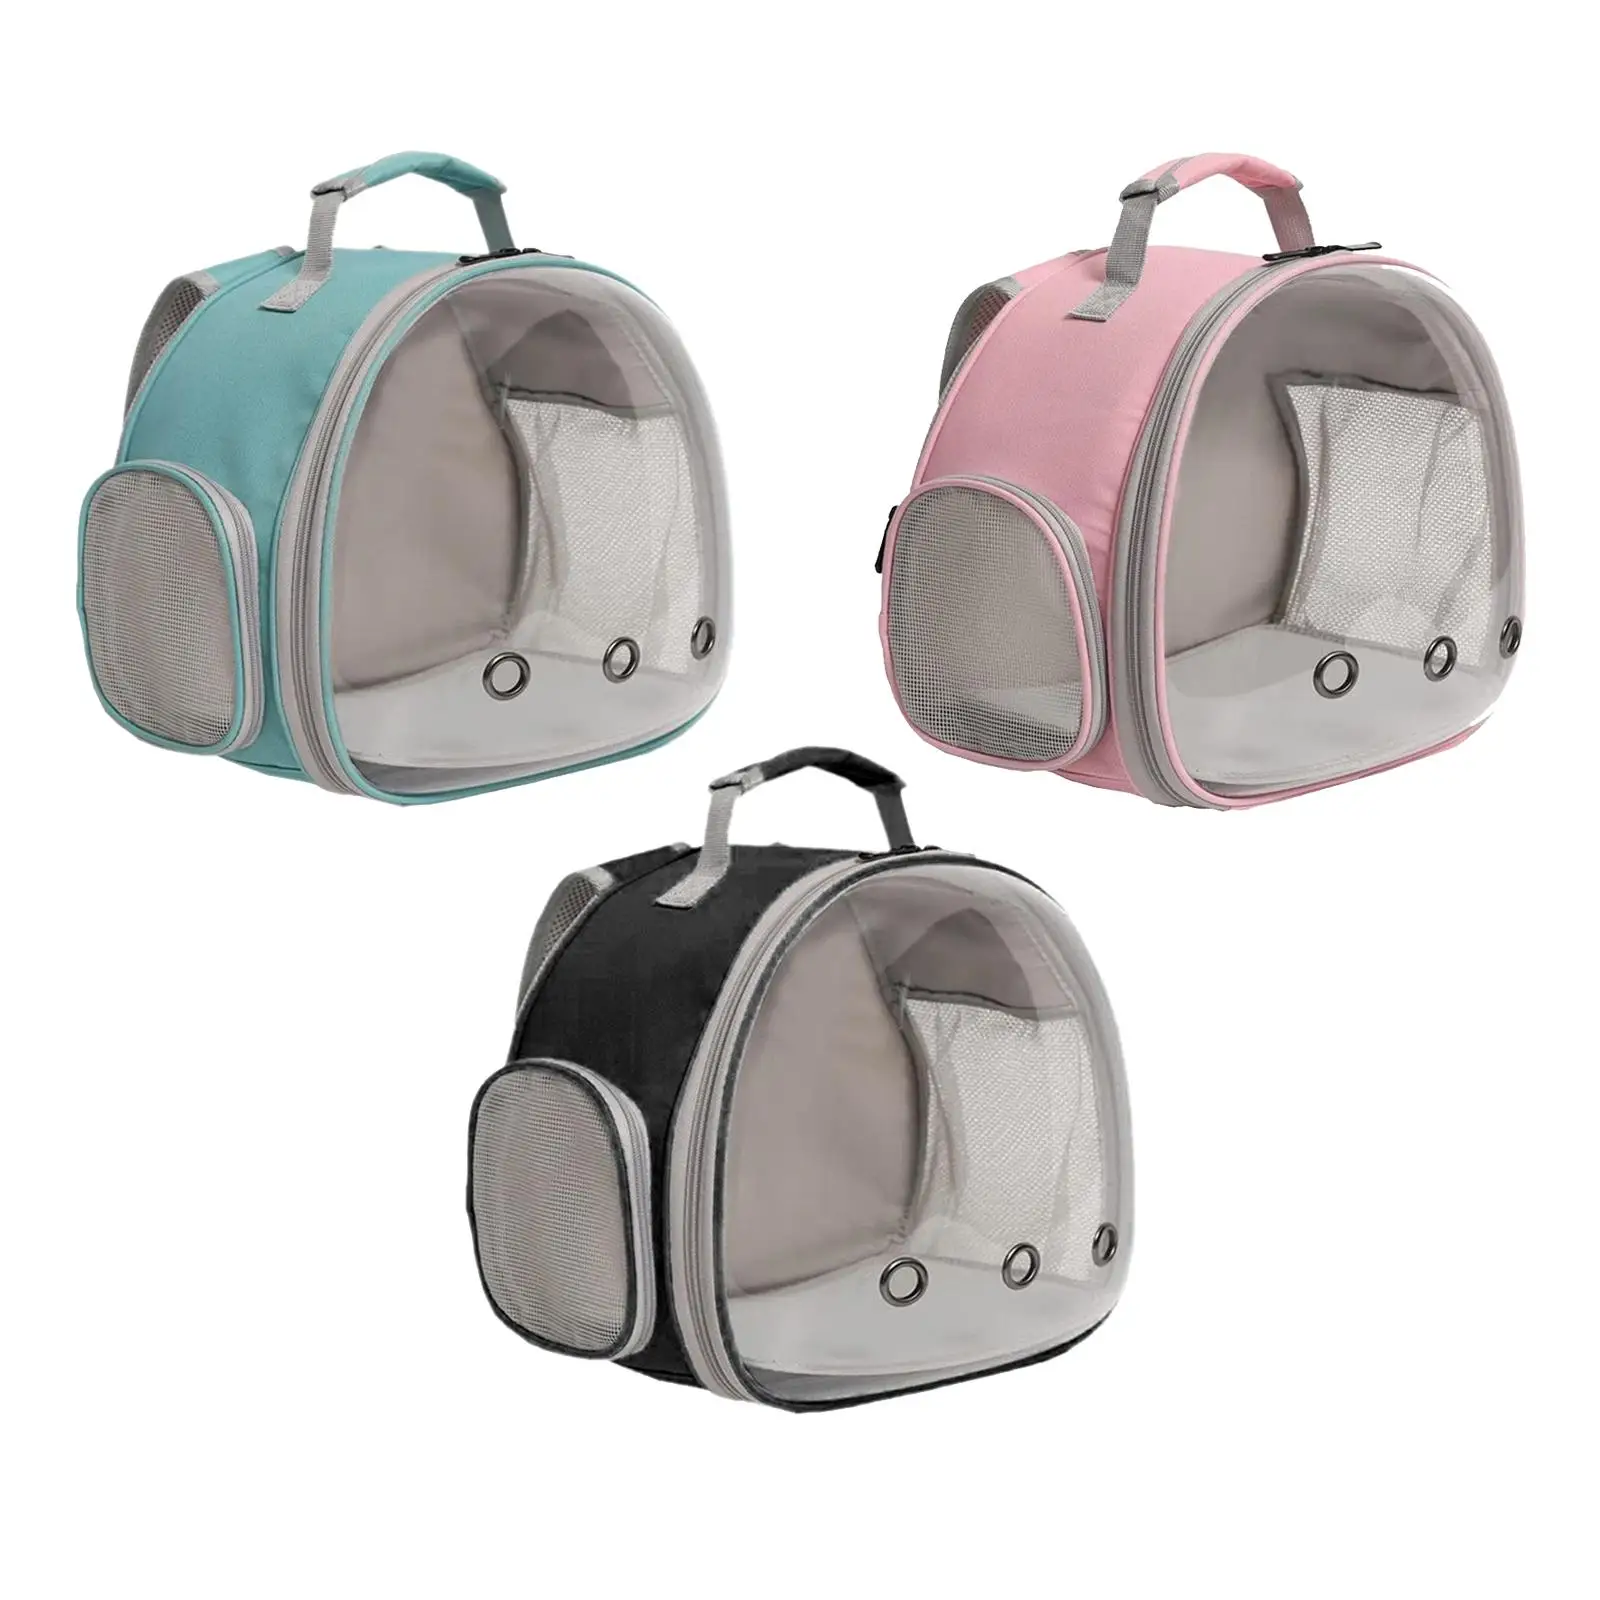 Pet Hamster Carrier Backpack Breathable Clear Window Multifunction Pouch Pet Travel Bag Carrying Bag for Hedgehog Parrot Bird